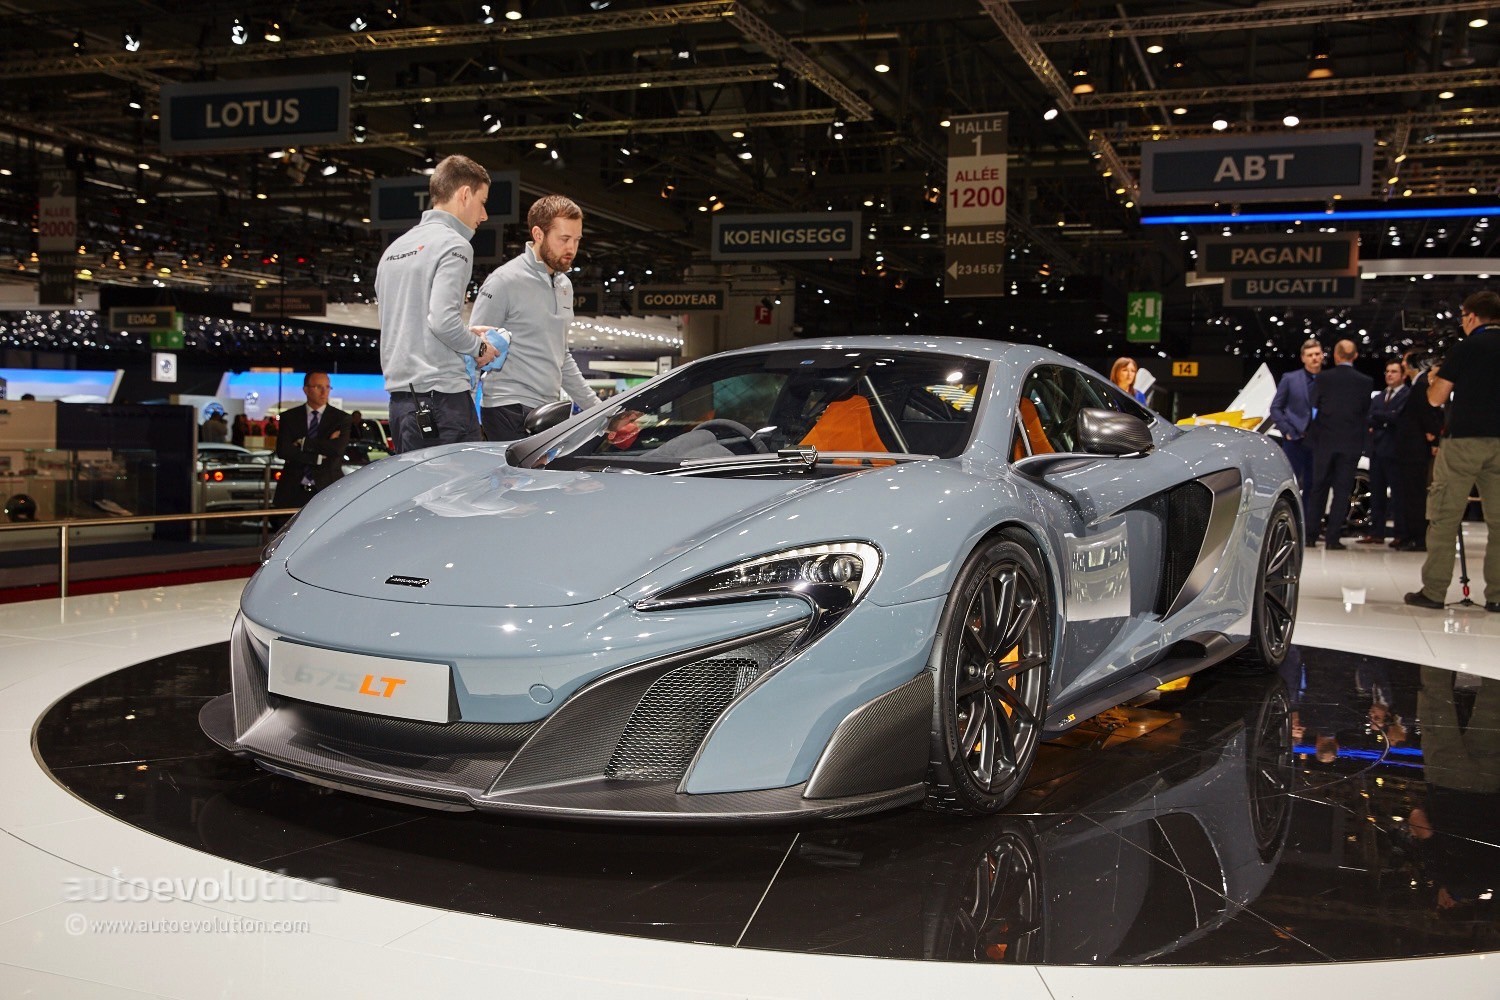 mclaren-675lt-is-a-longtail-supercar-for-the-track-in-geneva-video-live-photos_17